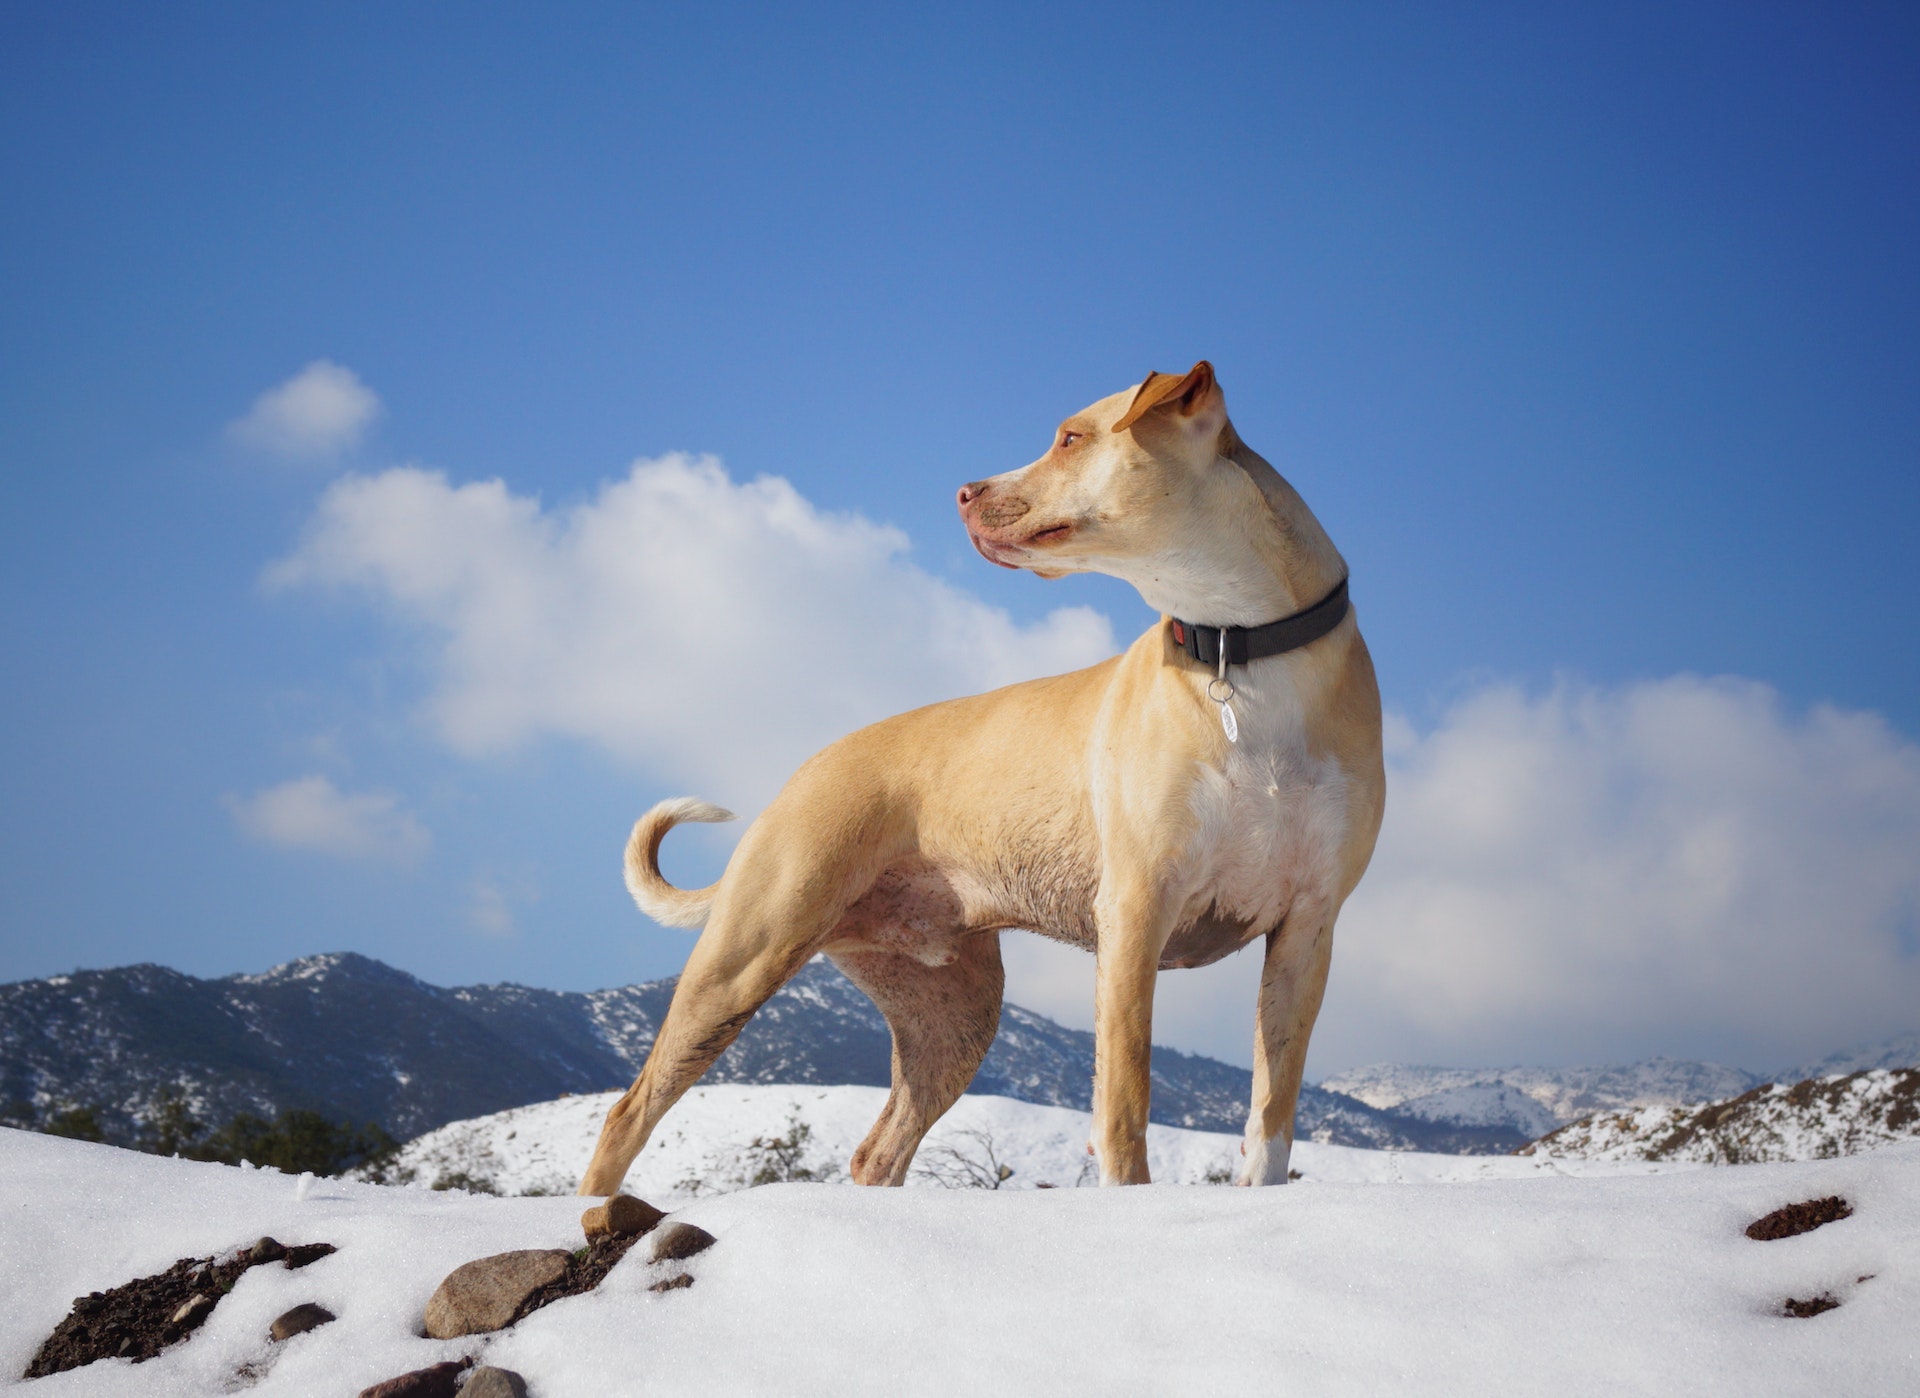 A dog standing in a snowy field with a clear view of their collar and ID tag